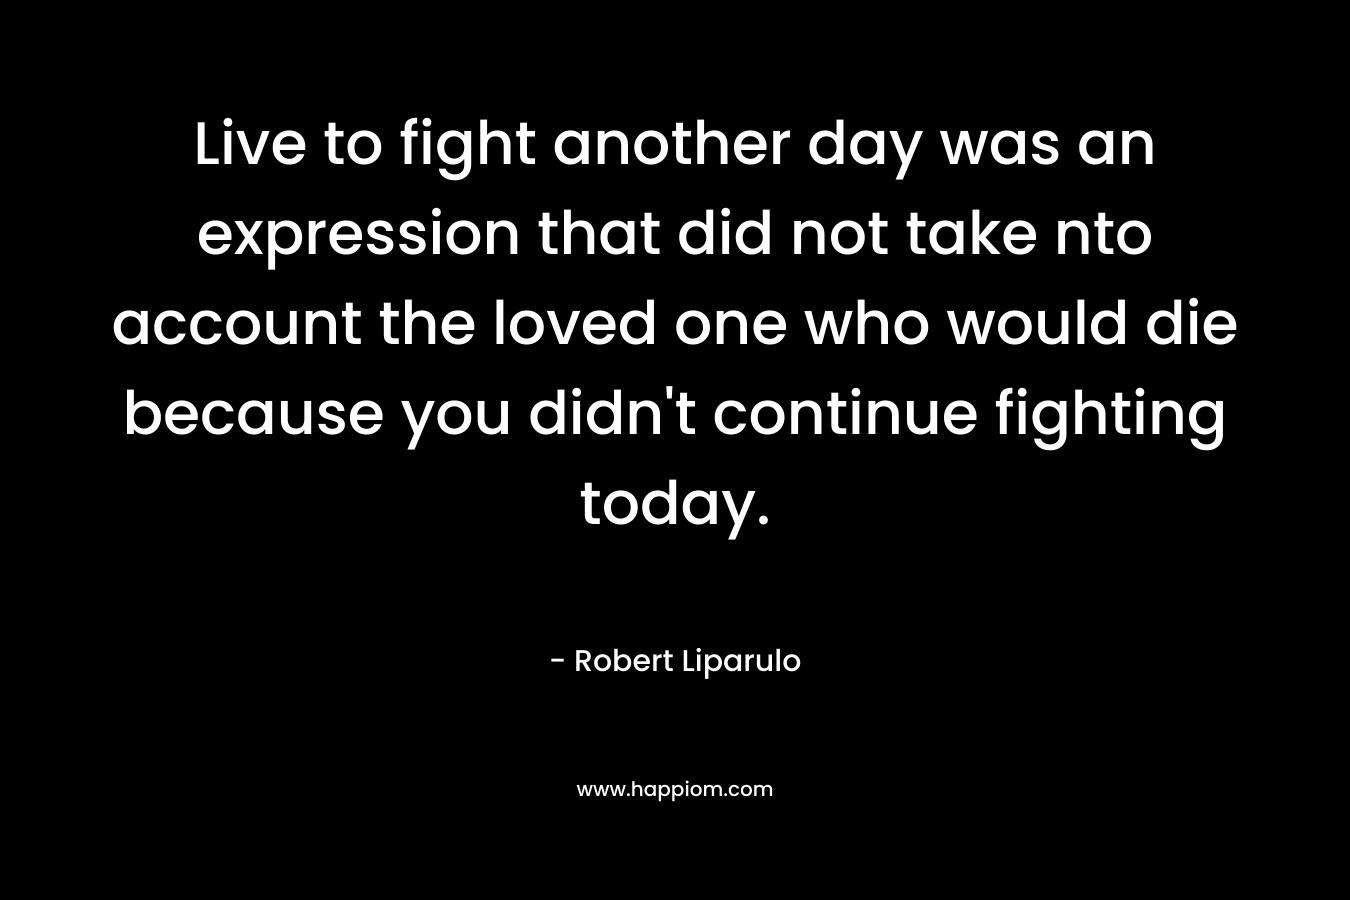 Live to fight another day was an expression that did not take nto account the loved one who would die because you didn't continue fighting today.